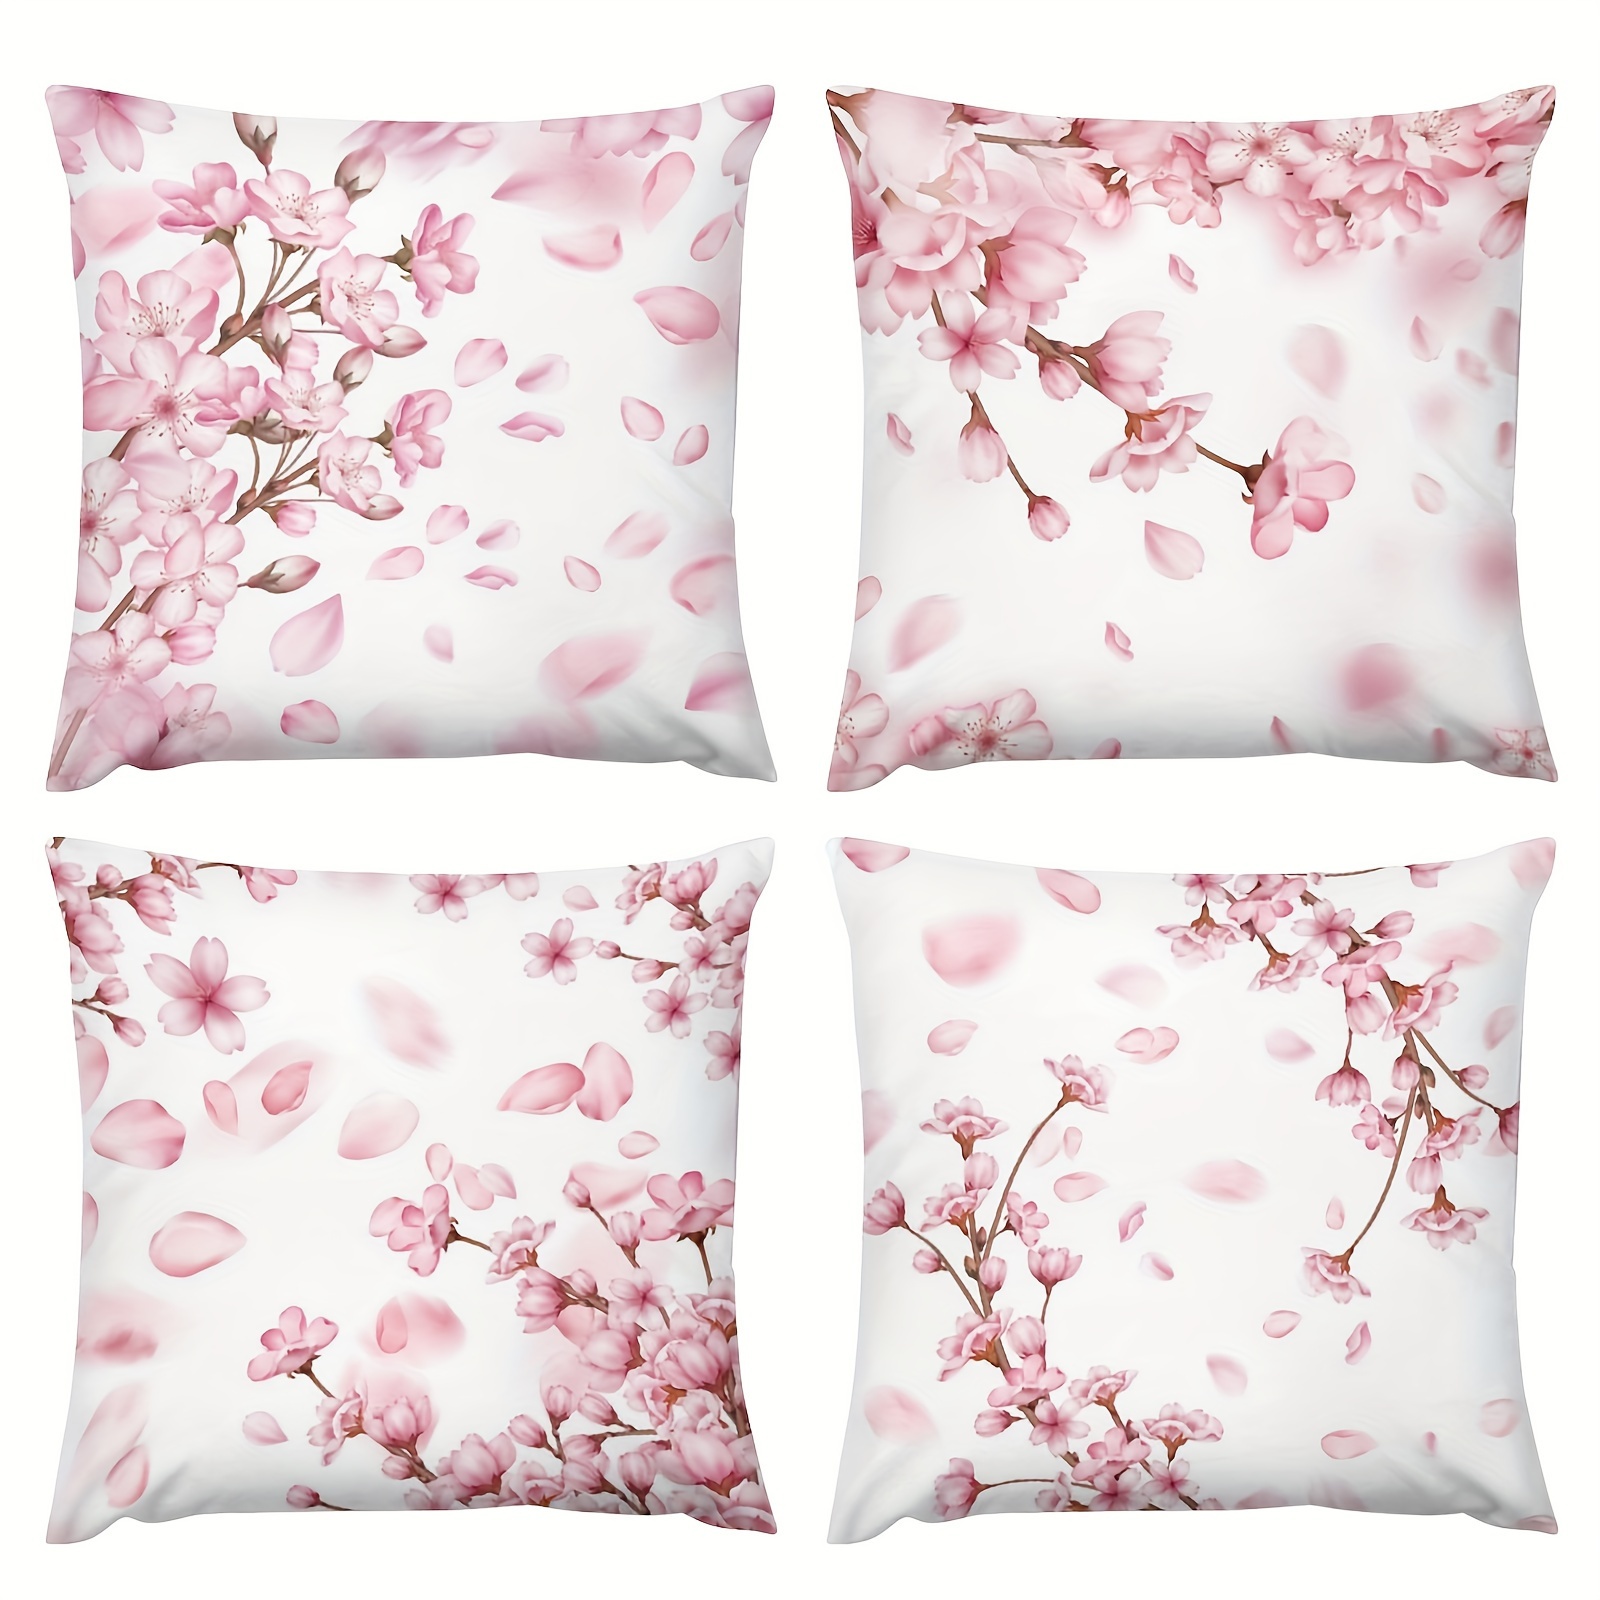 

4pcs, Sakura Polyester Throw Pillow Case, Cherry Blossom Pattern, Double-sided Pattern, Room Decoration, Aesthetic Room Decor, Bedroom Decor, Home Decoration, House Decor, Pillow Insert Not Included